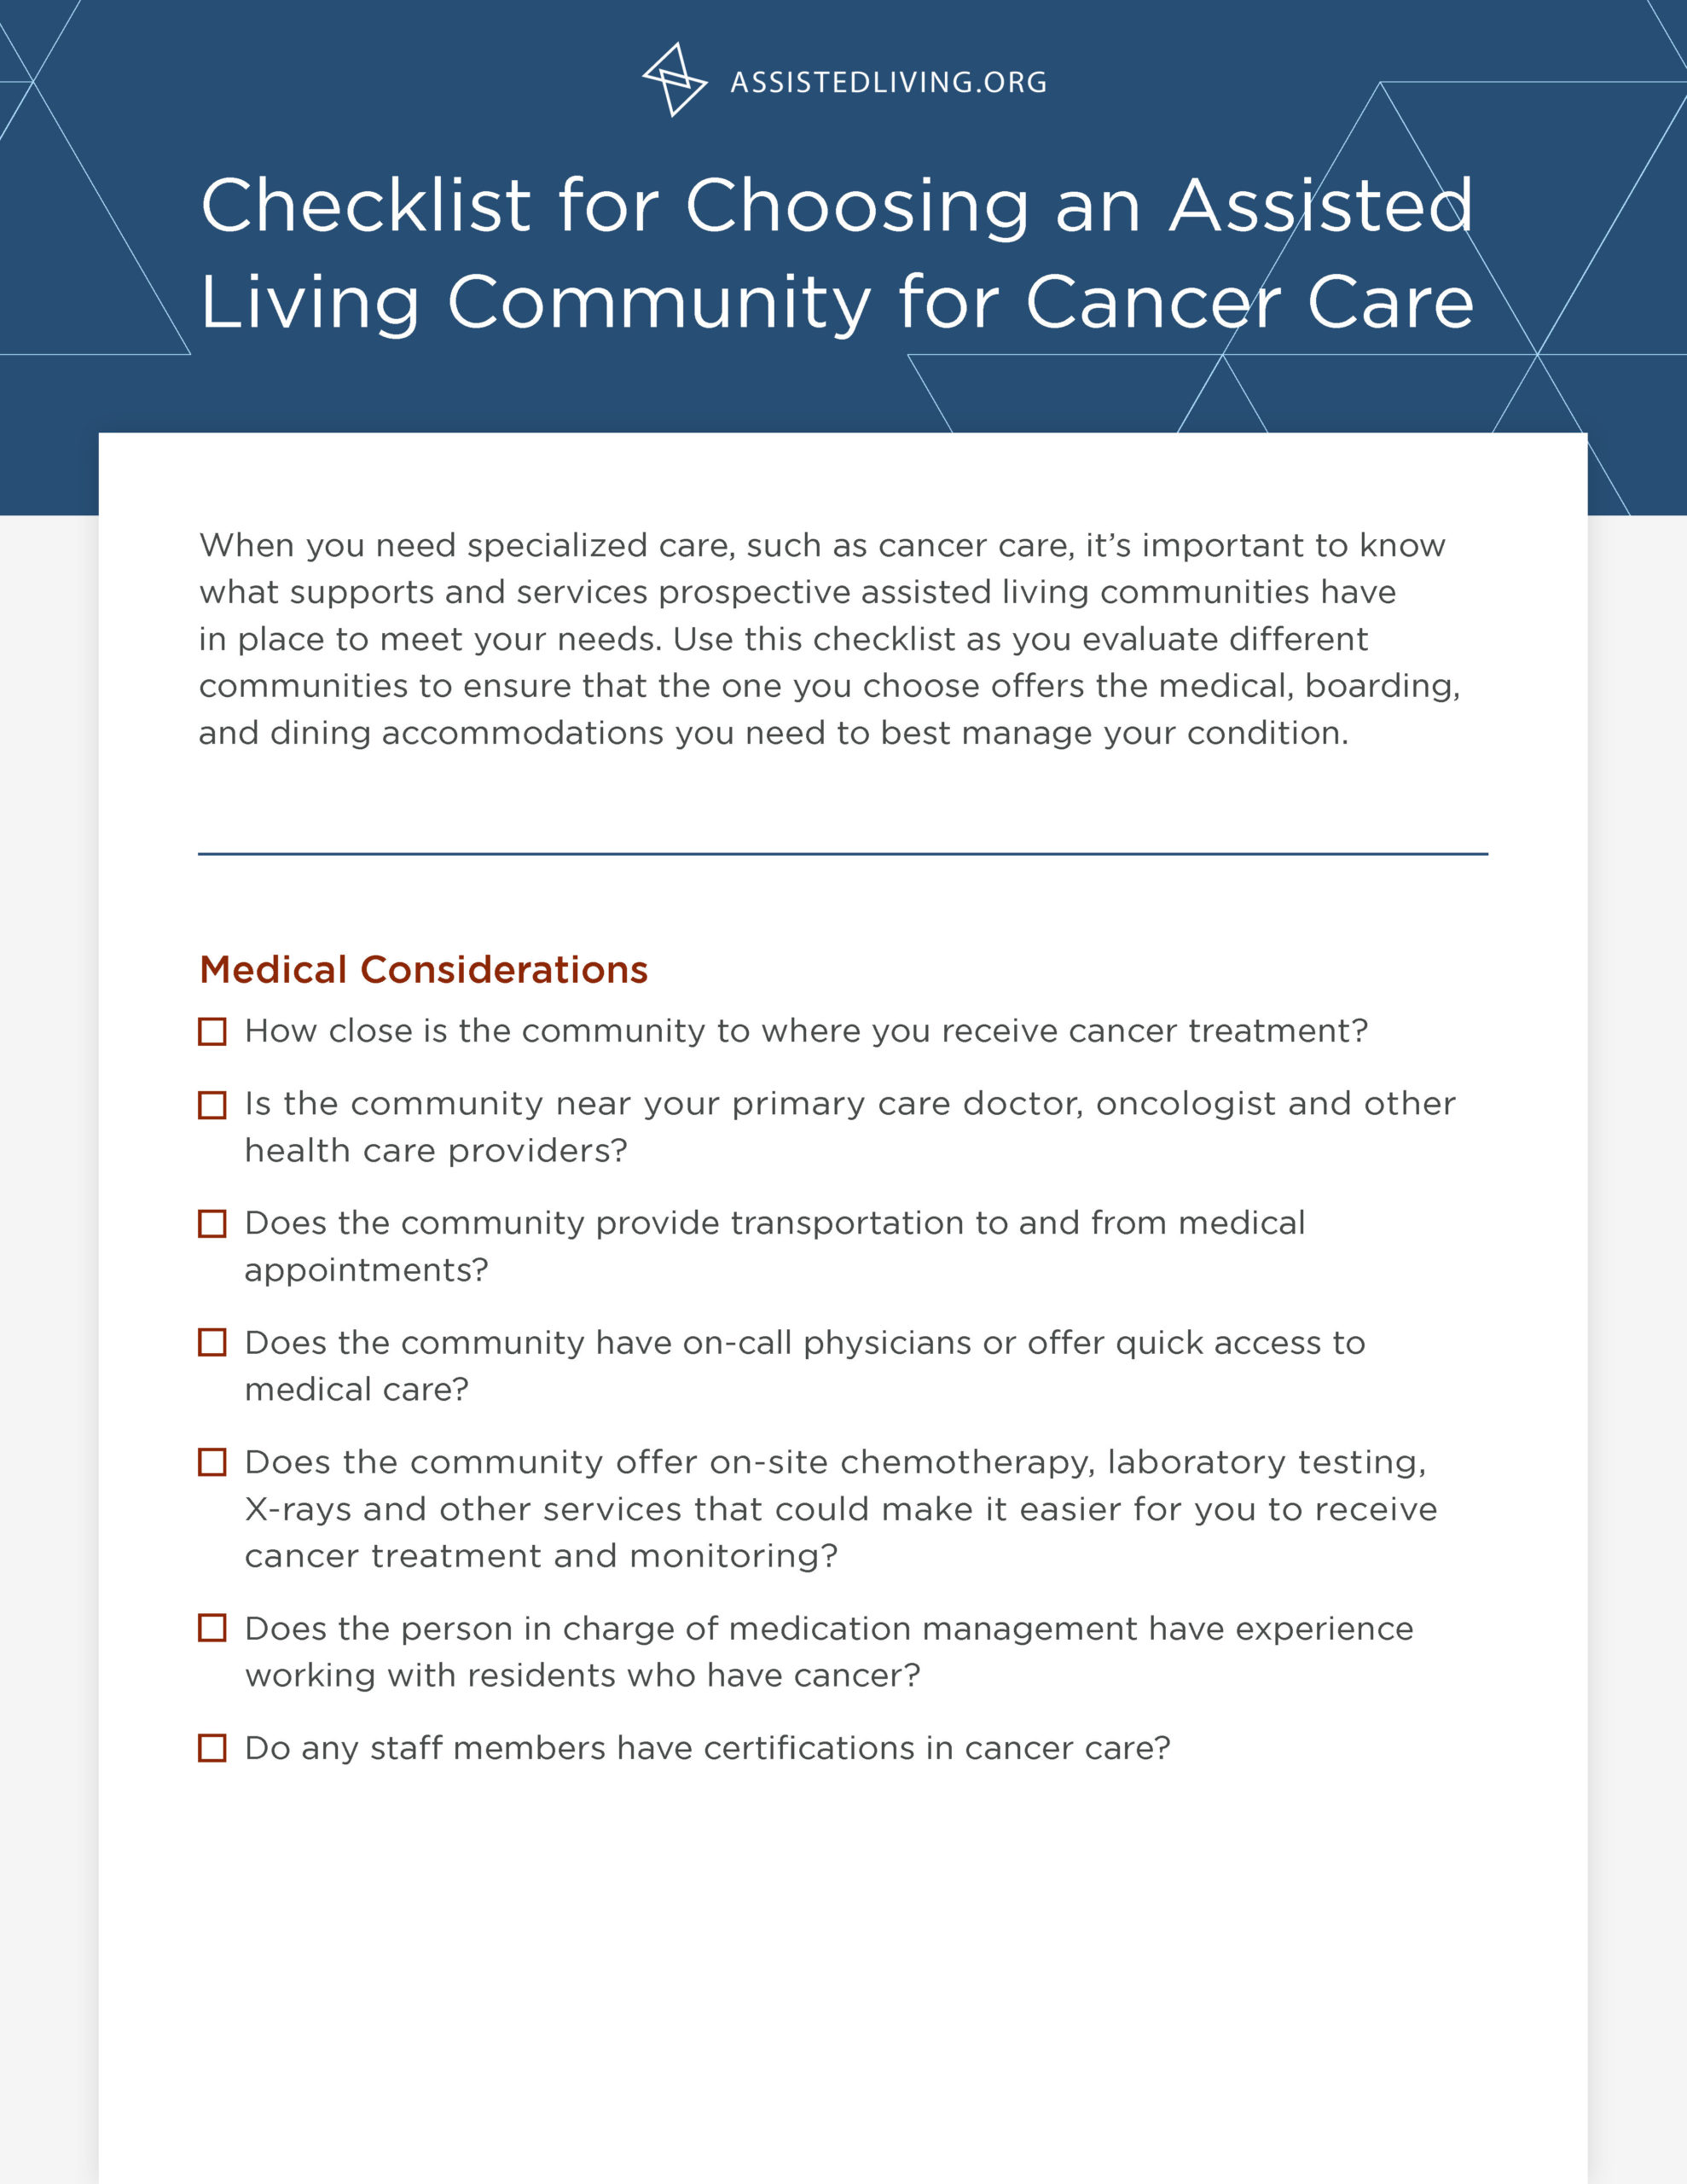 Choosing an Assisted Living Facility for Cancer Care